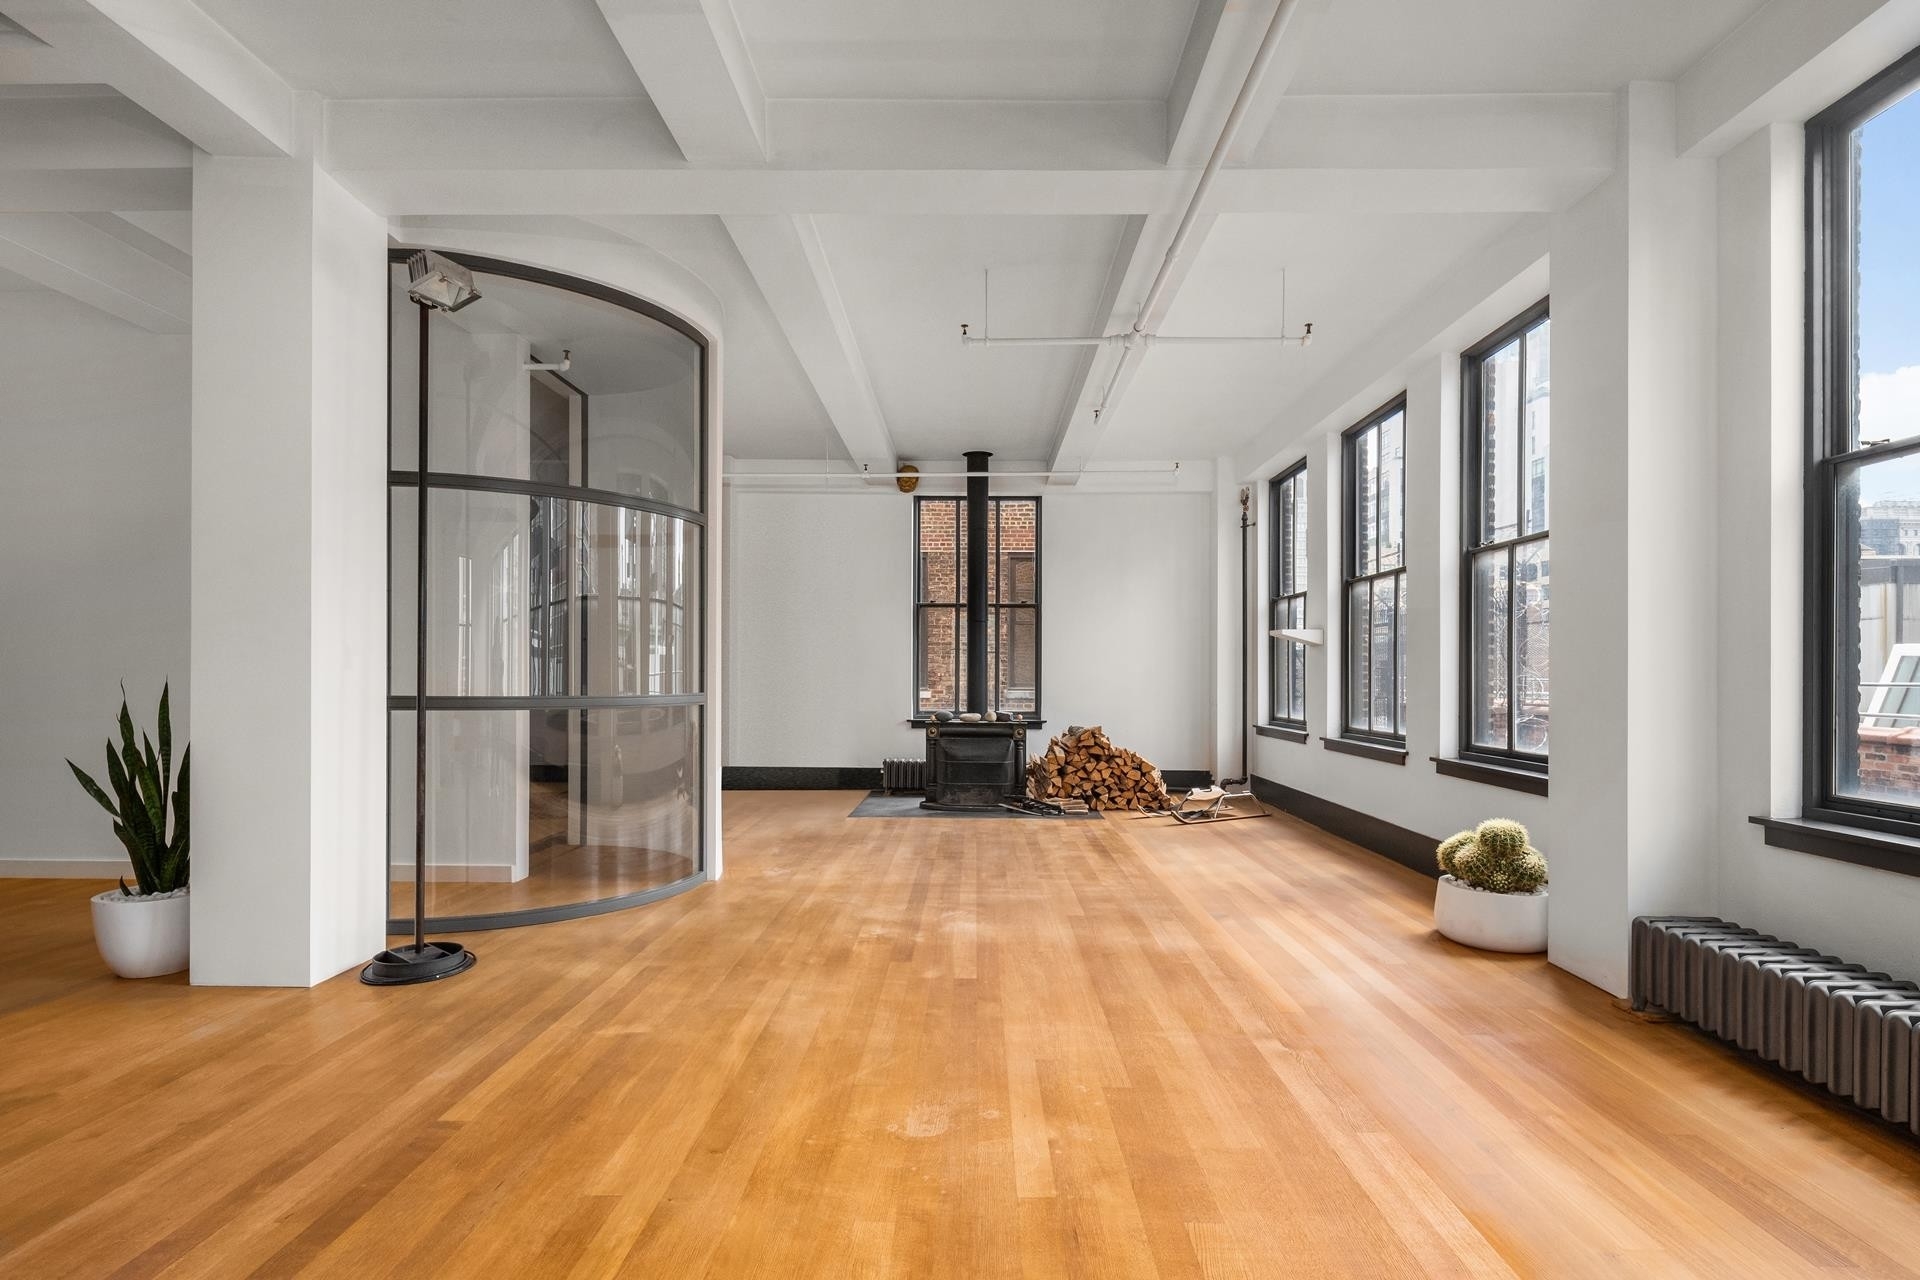 3. Co-op Properties for Sale at 12 Lofts, 38 W 26TH ST, PH12 Flatiron District, New York, NY 10010